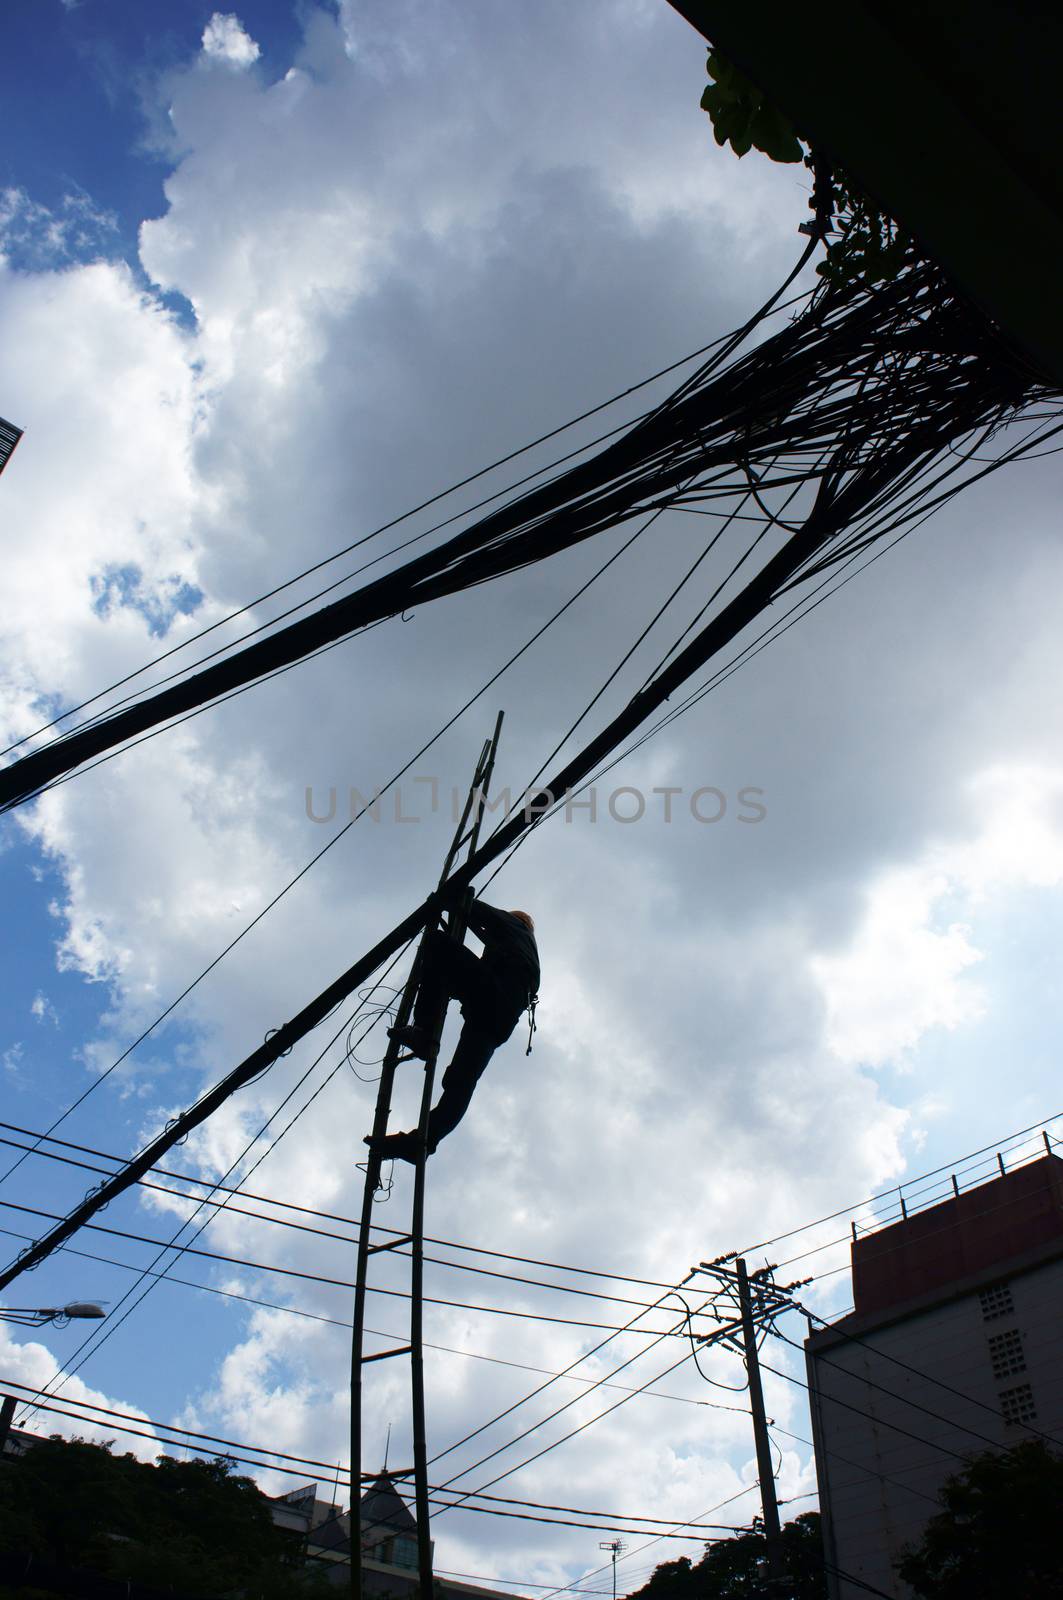 Electrician working among electric wire network in the blue sky as spider